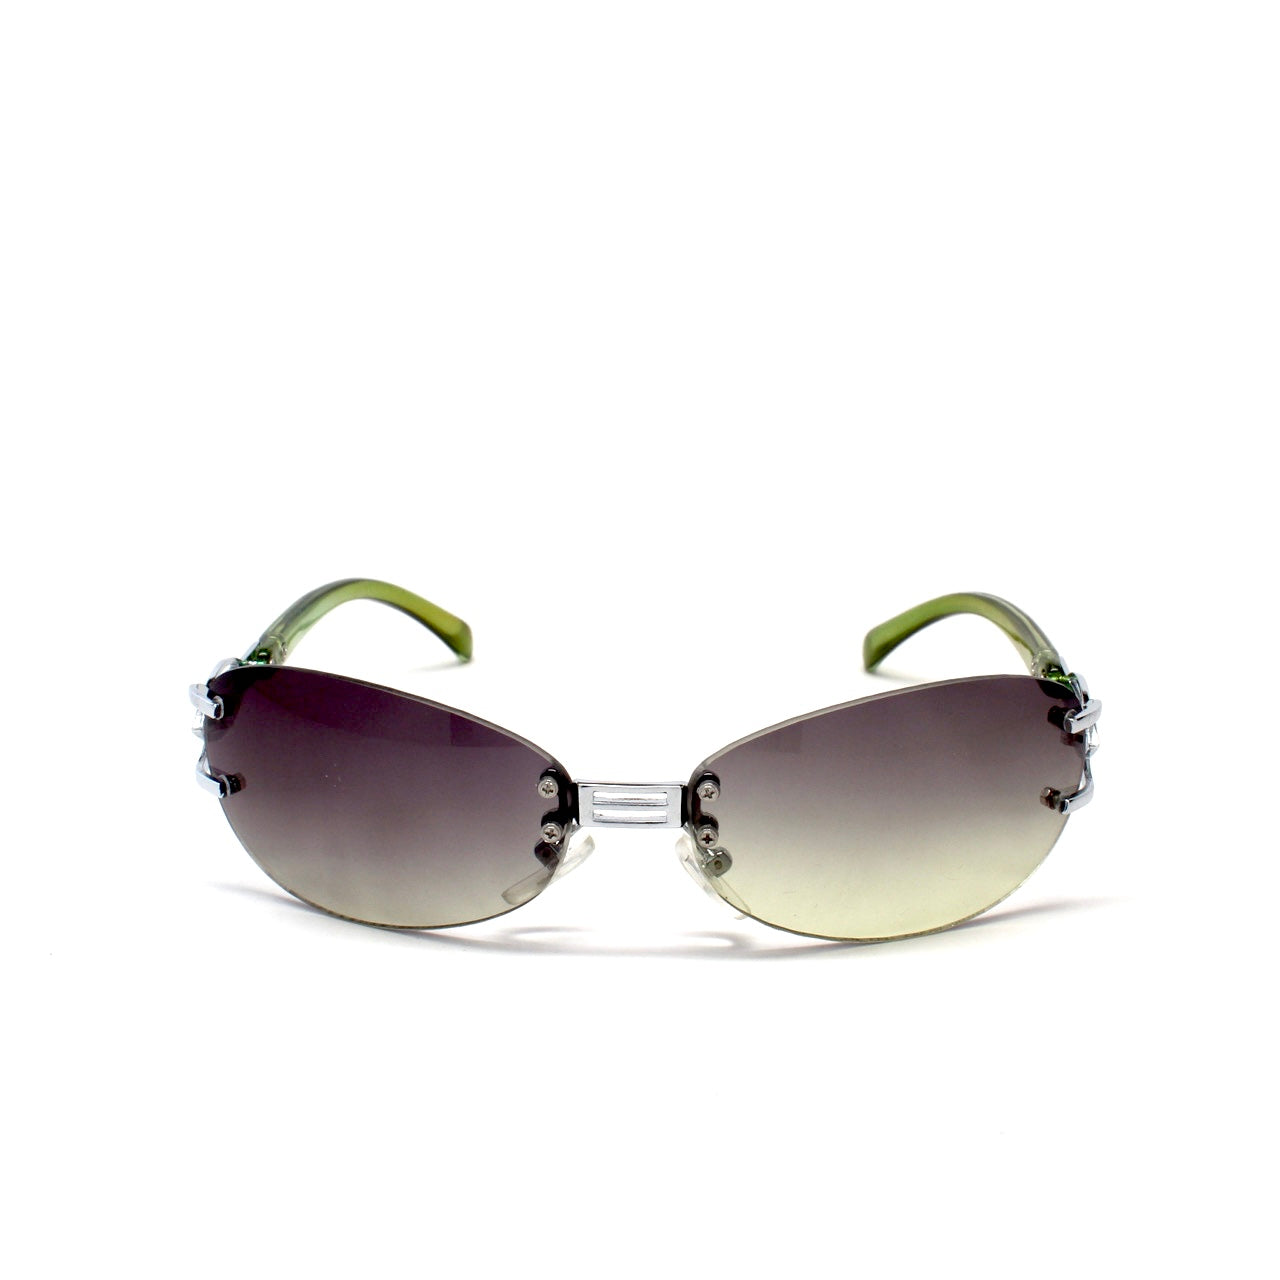 X-Static 1996 Rimless Two Tone Style Sunglasses - Green